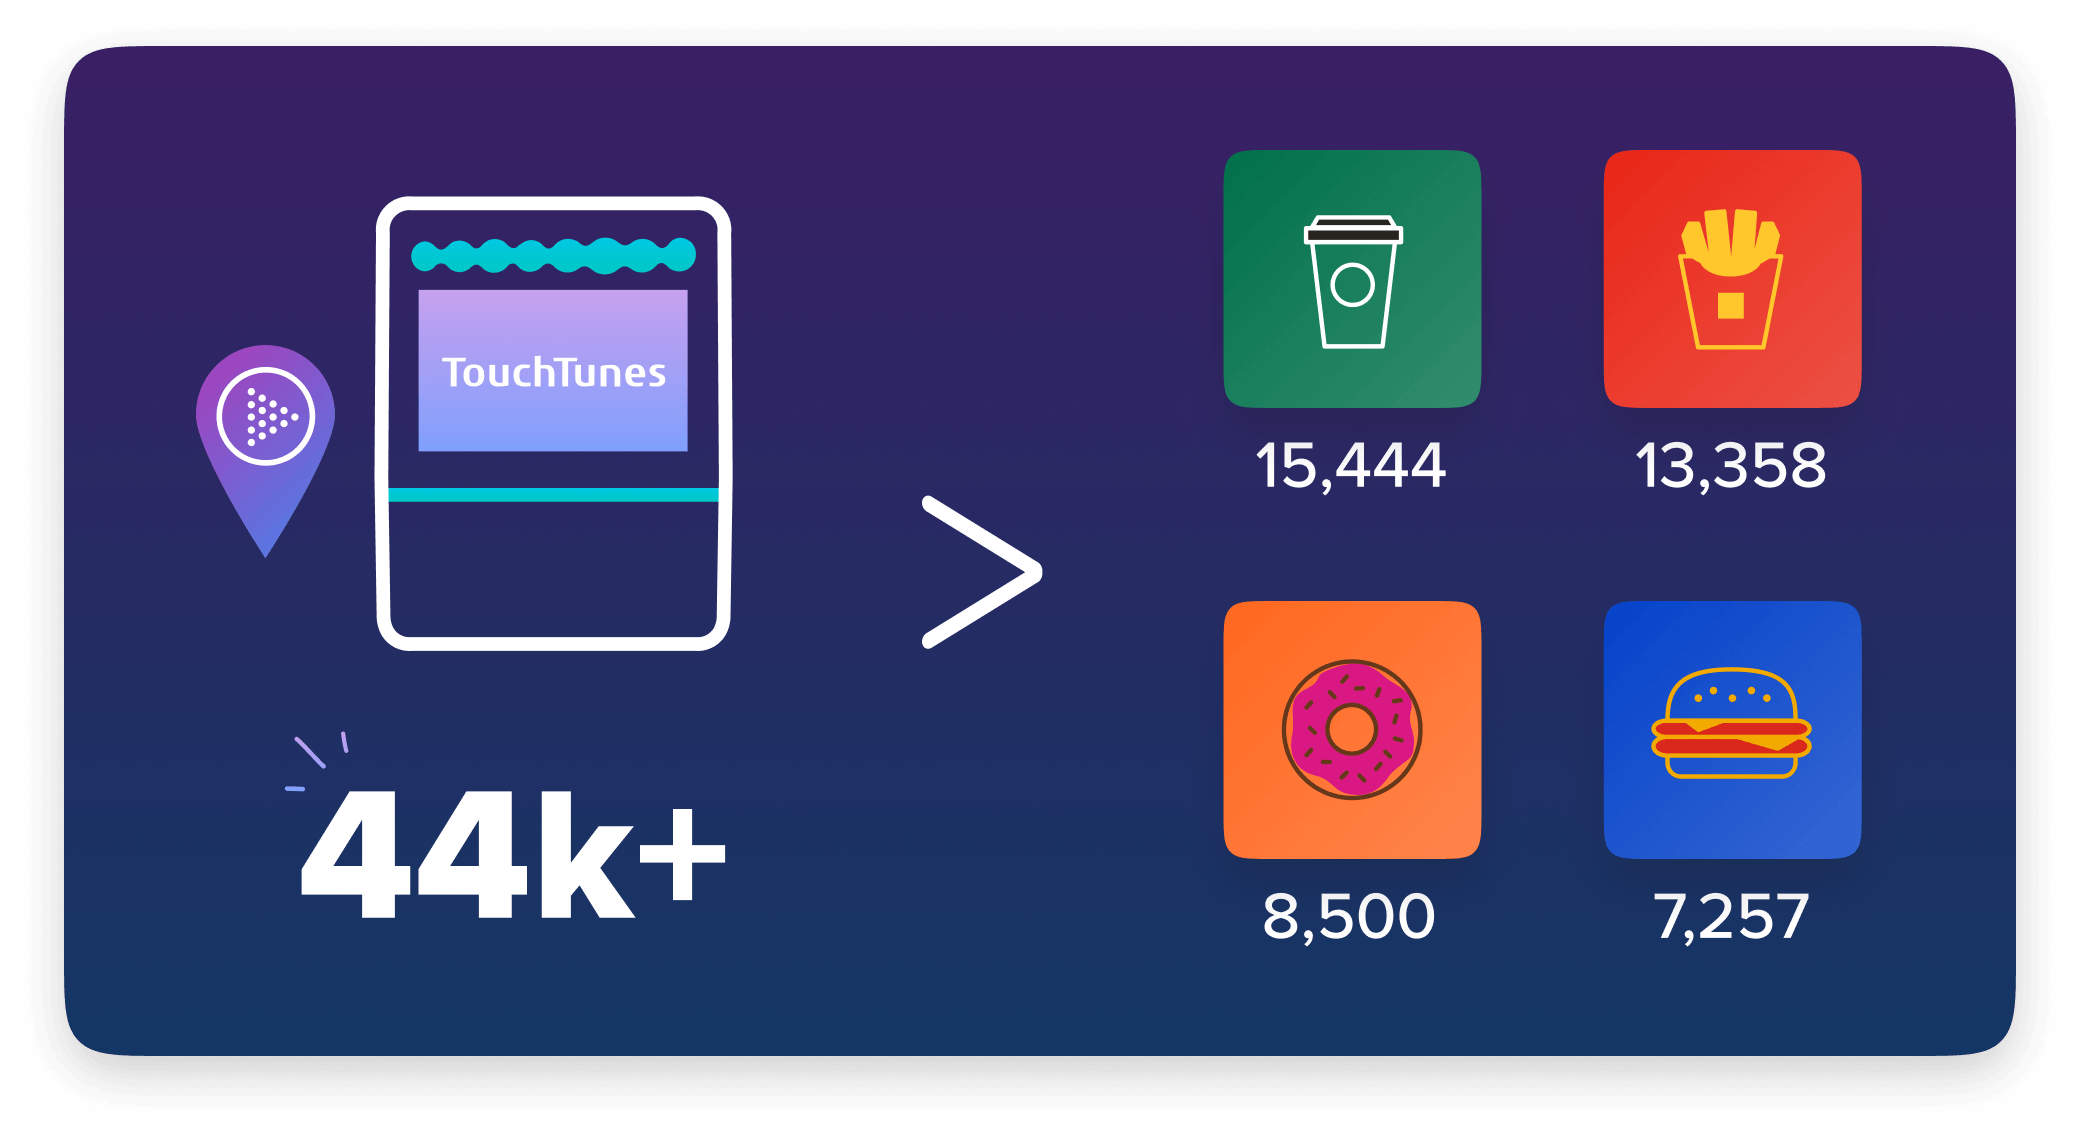 TouchTunes locations (44k+) > national coffee, burger and donut brand locations combined